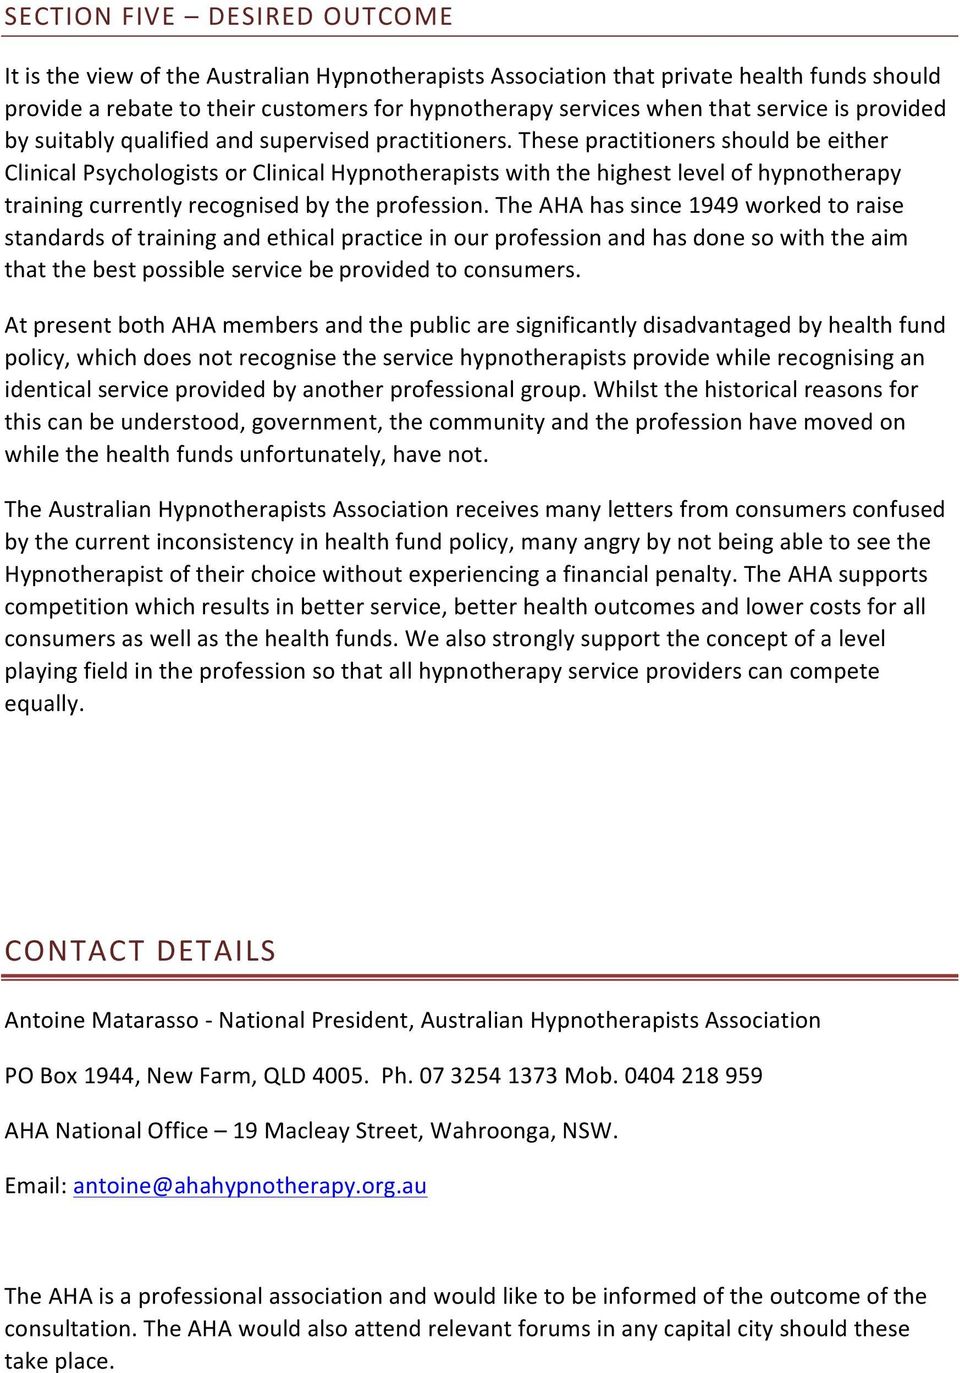 These practitioners should be either Clinical Psychologists or Clinical Hypnotherapists with the highest level of hypnotherapy training currently recognised by the profession.